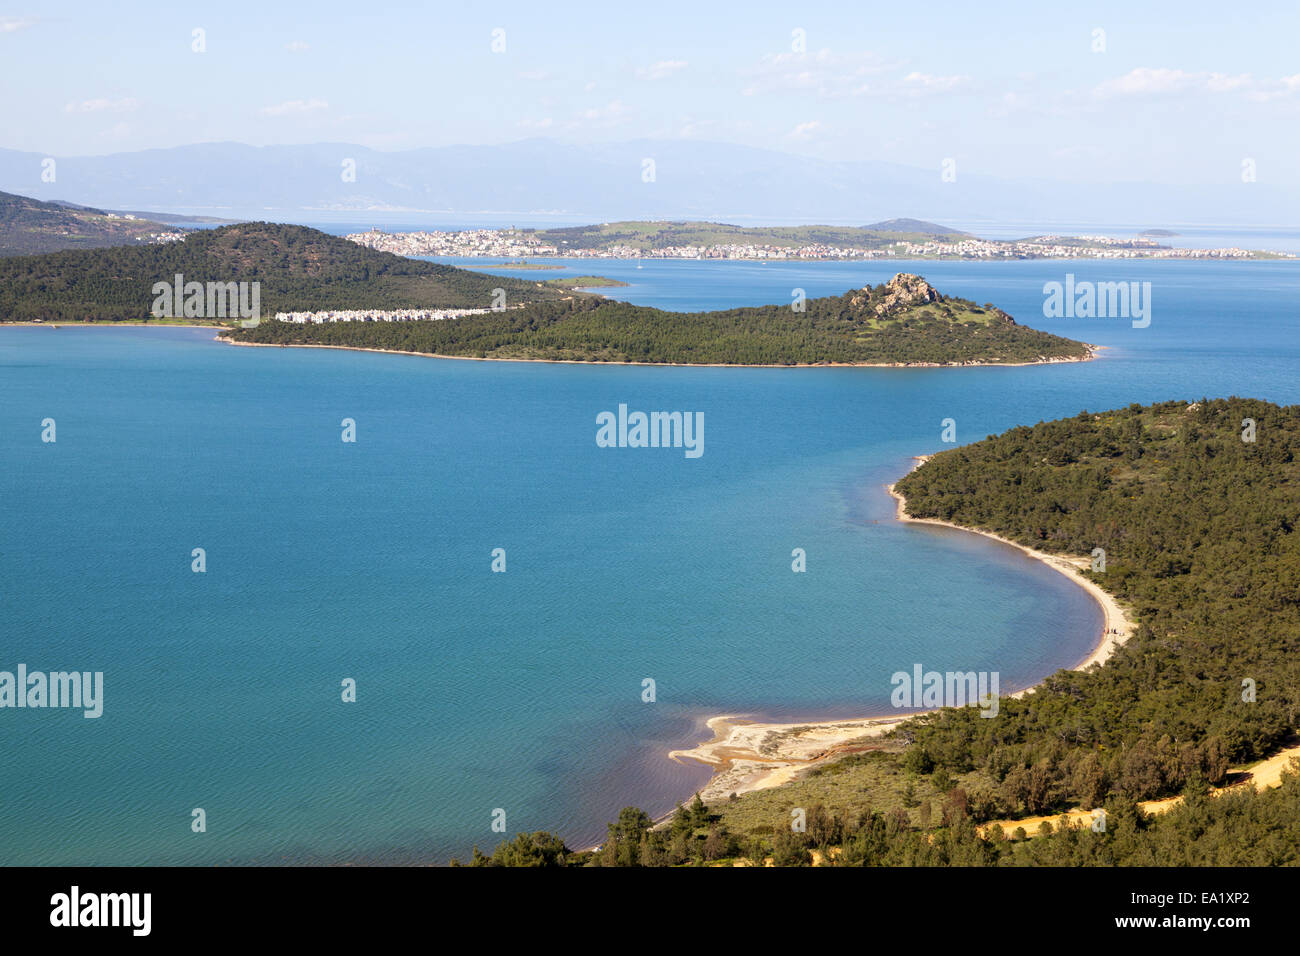 view of the coastline of the Turkish Aegean Stock Photo